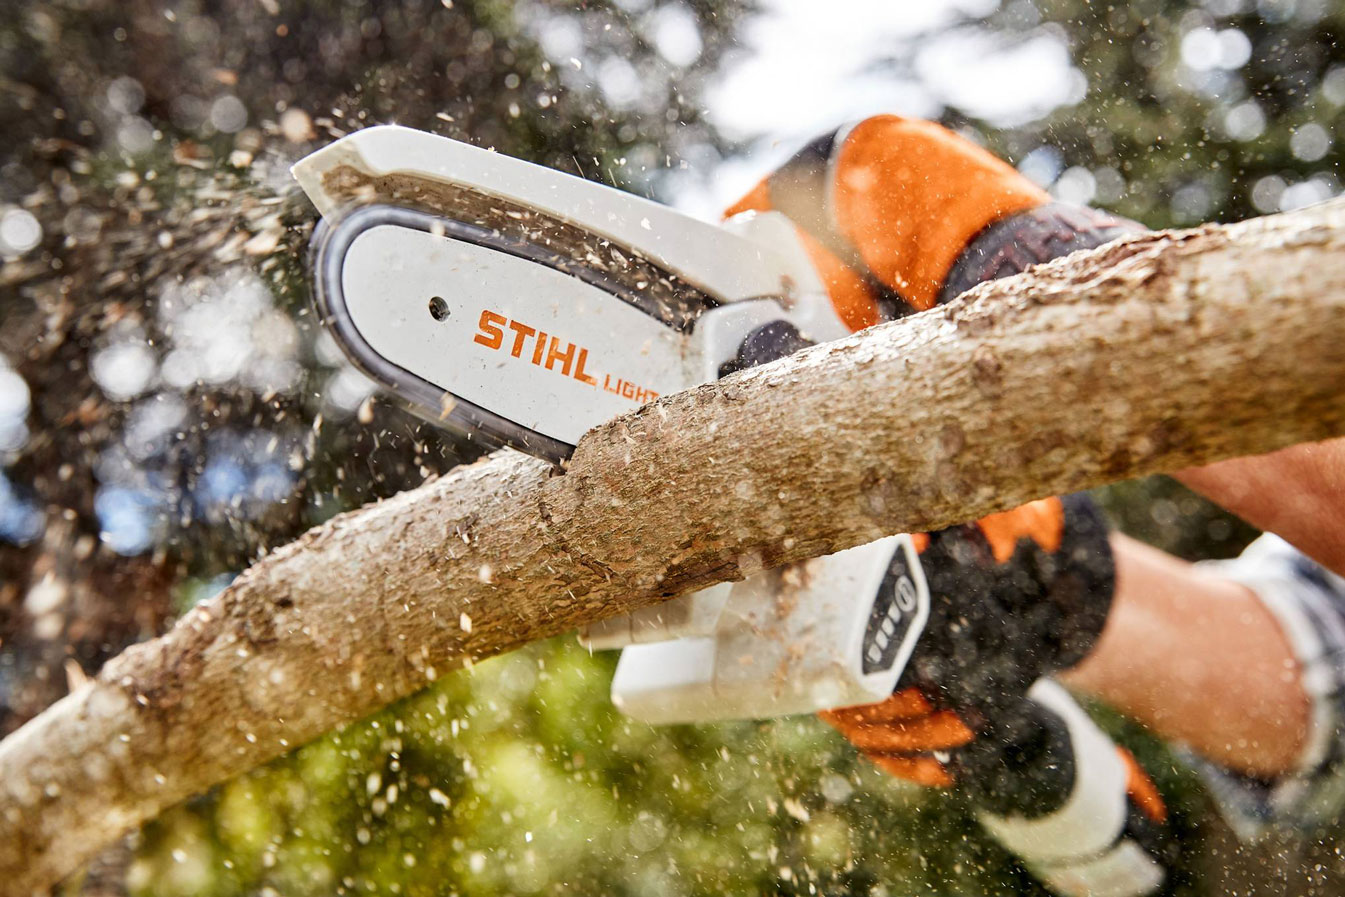 STIHL GTA 26 CORDLESS GARDER PRUNER SET WITH 2 BATTERIES AND CHARGER